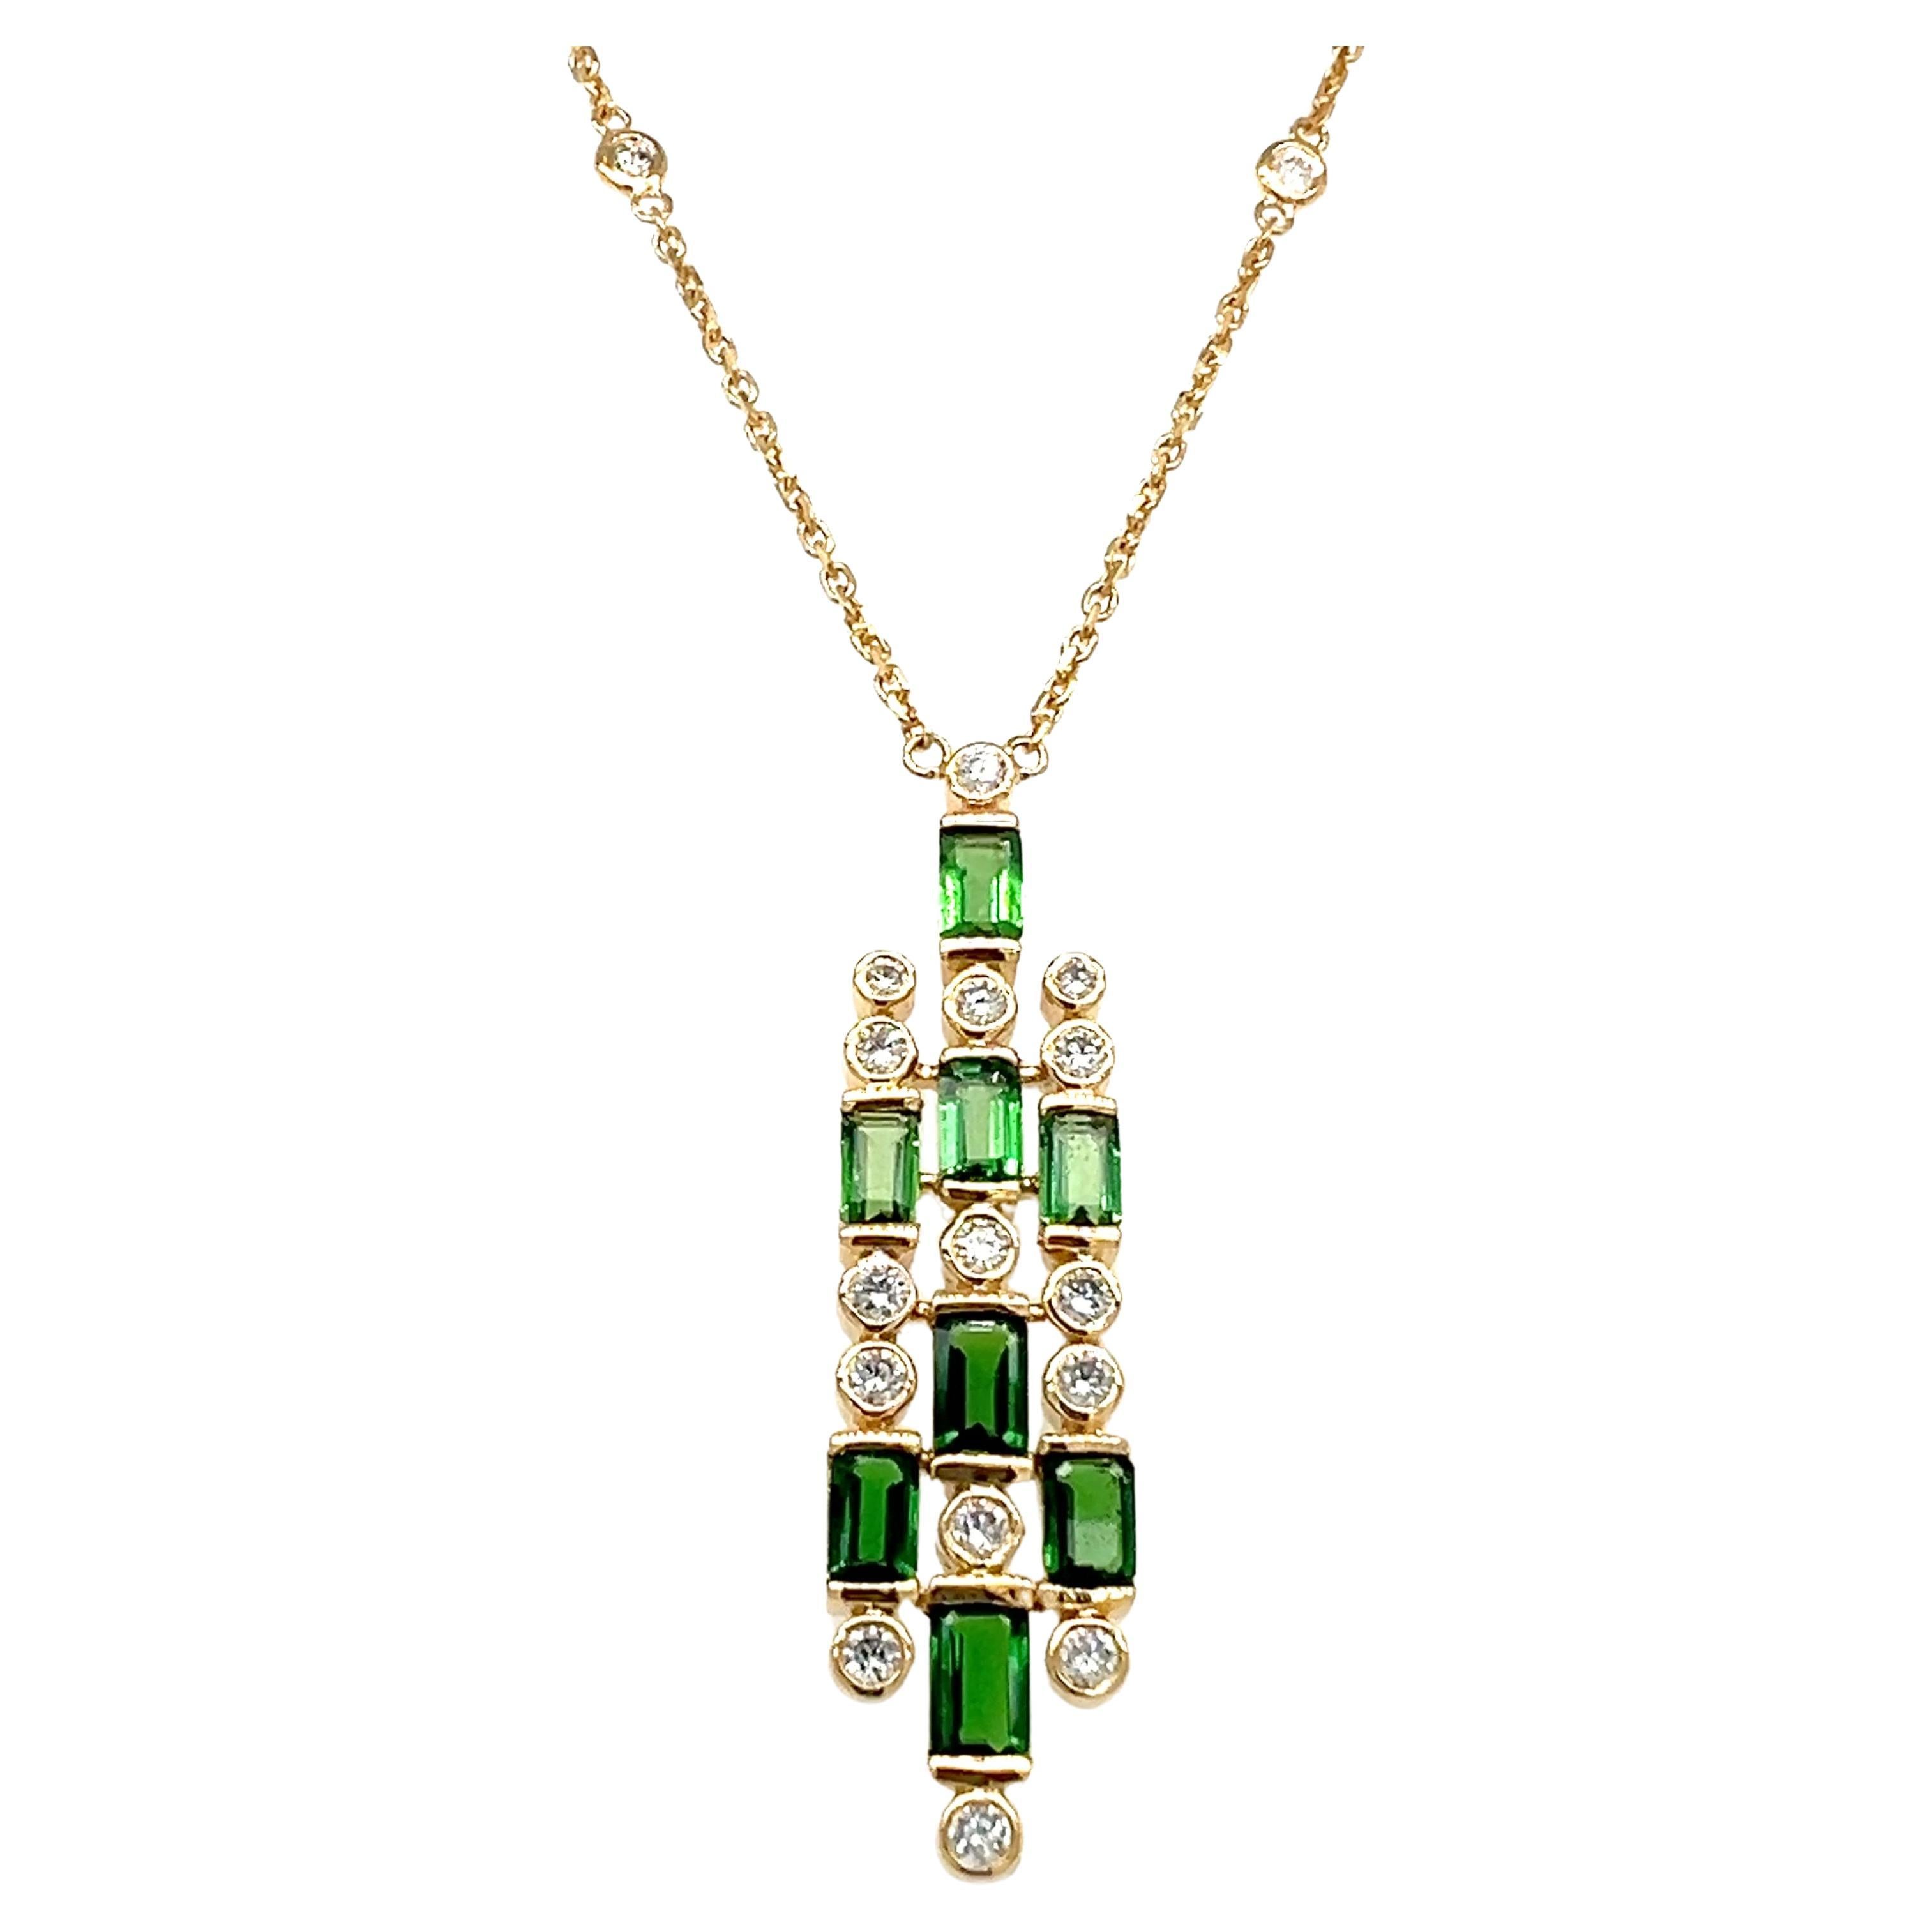  18 Kt gold natural Tsavorite and diamond necklace